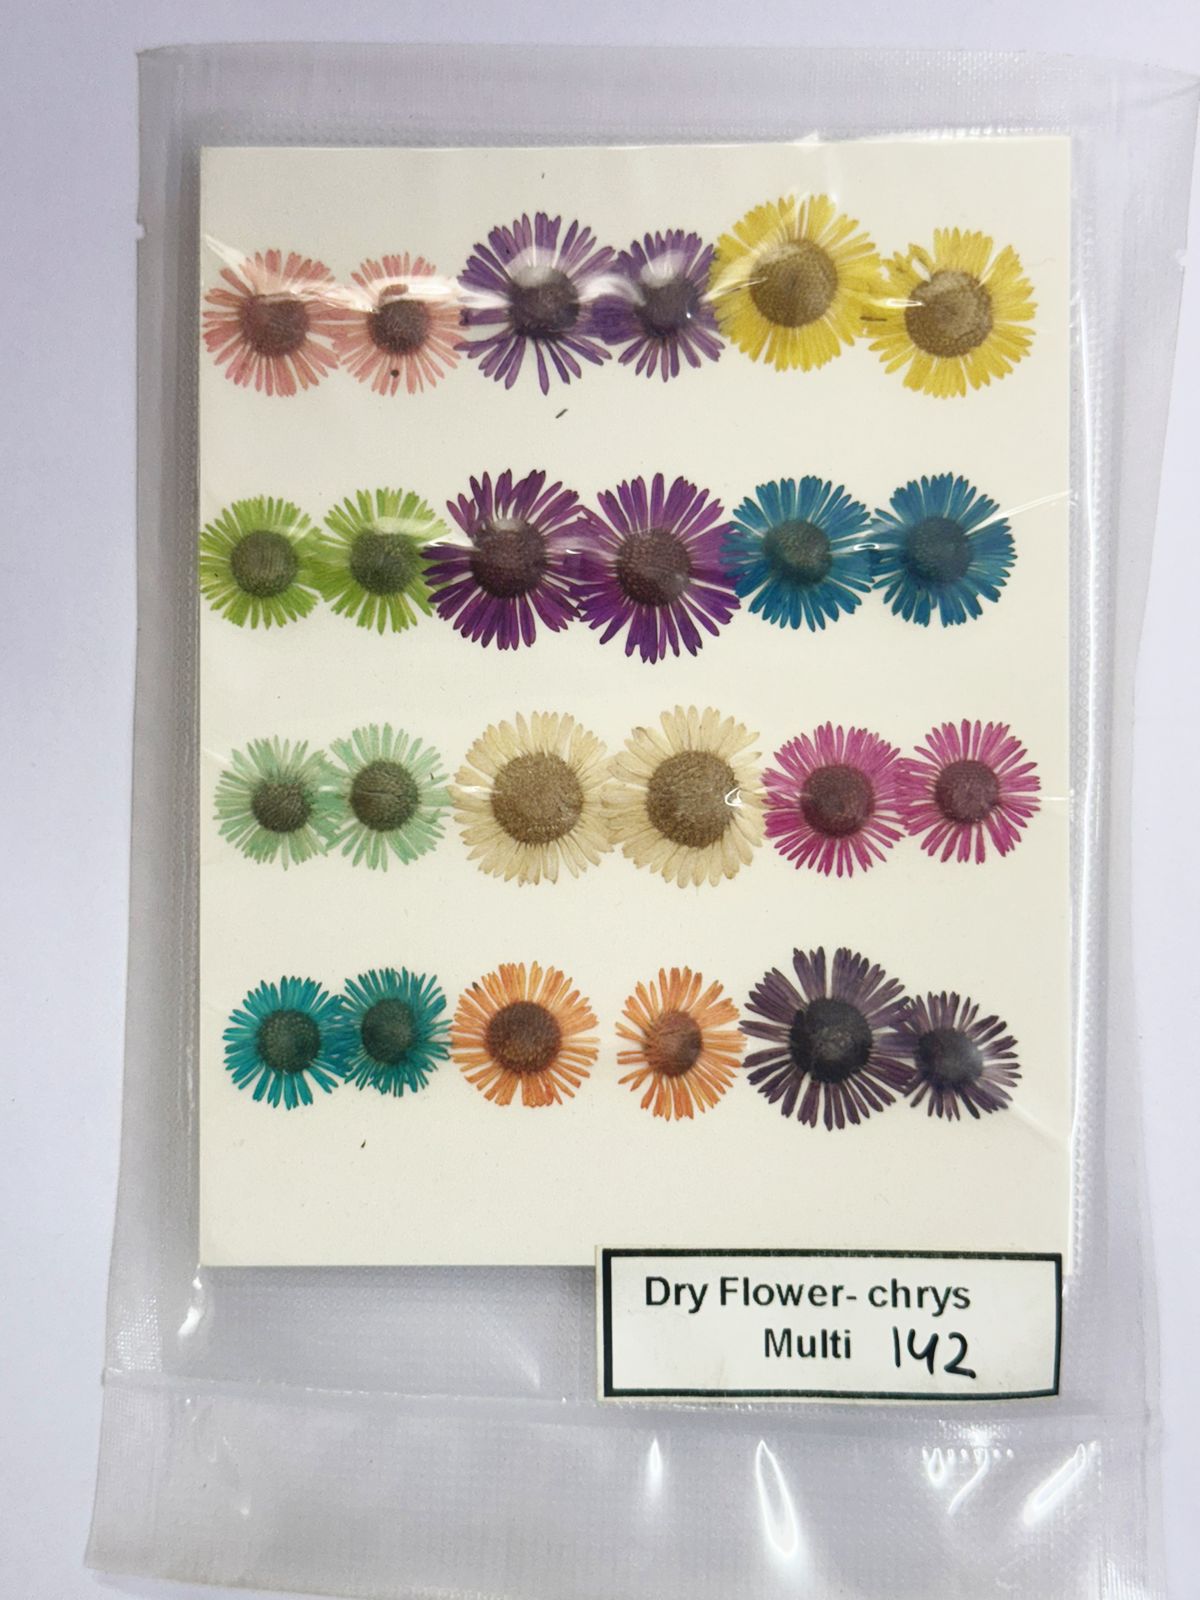 Pressed Dried Flowers- 1 pack – Chyrs – Multicolor design -142